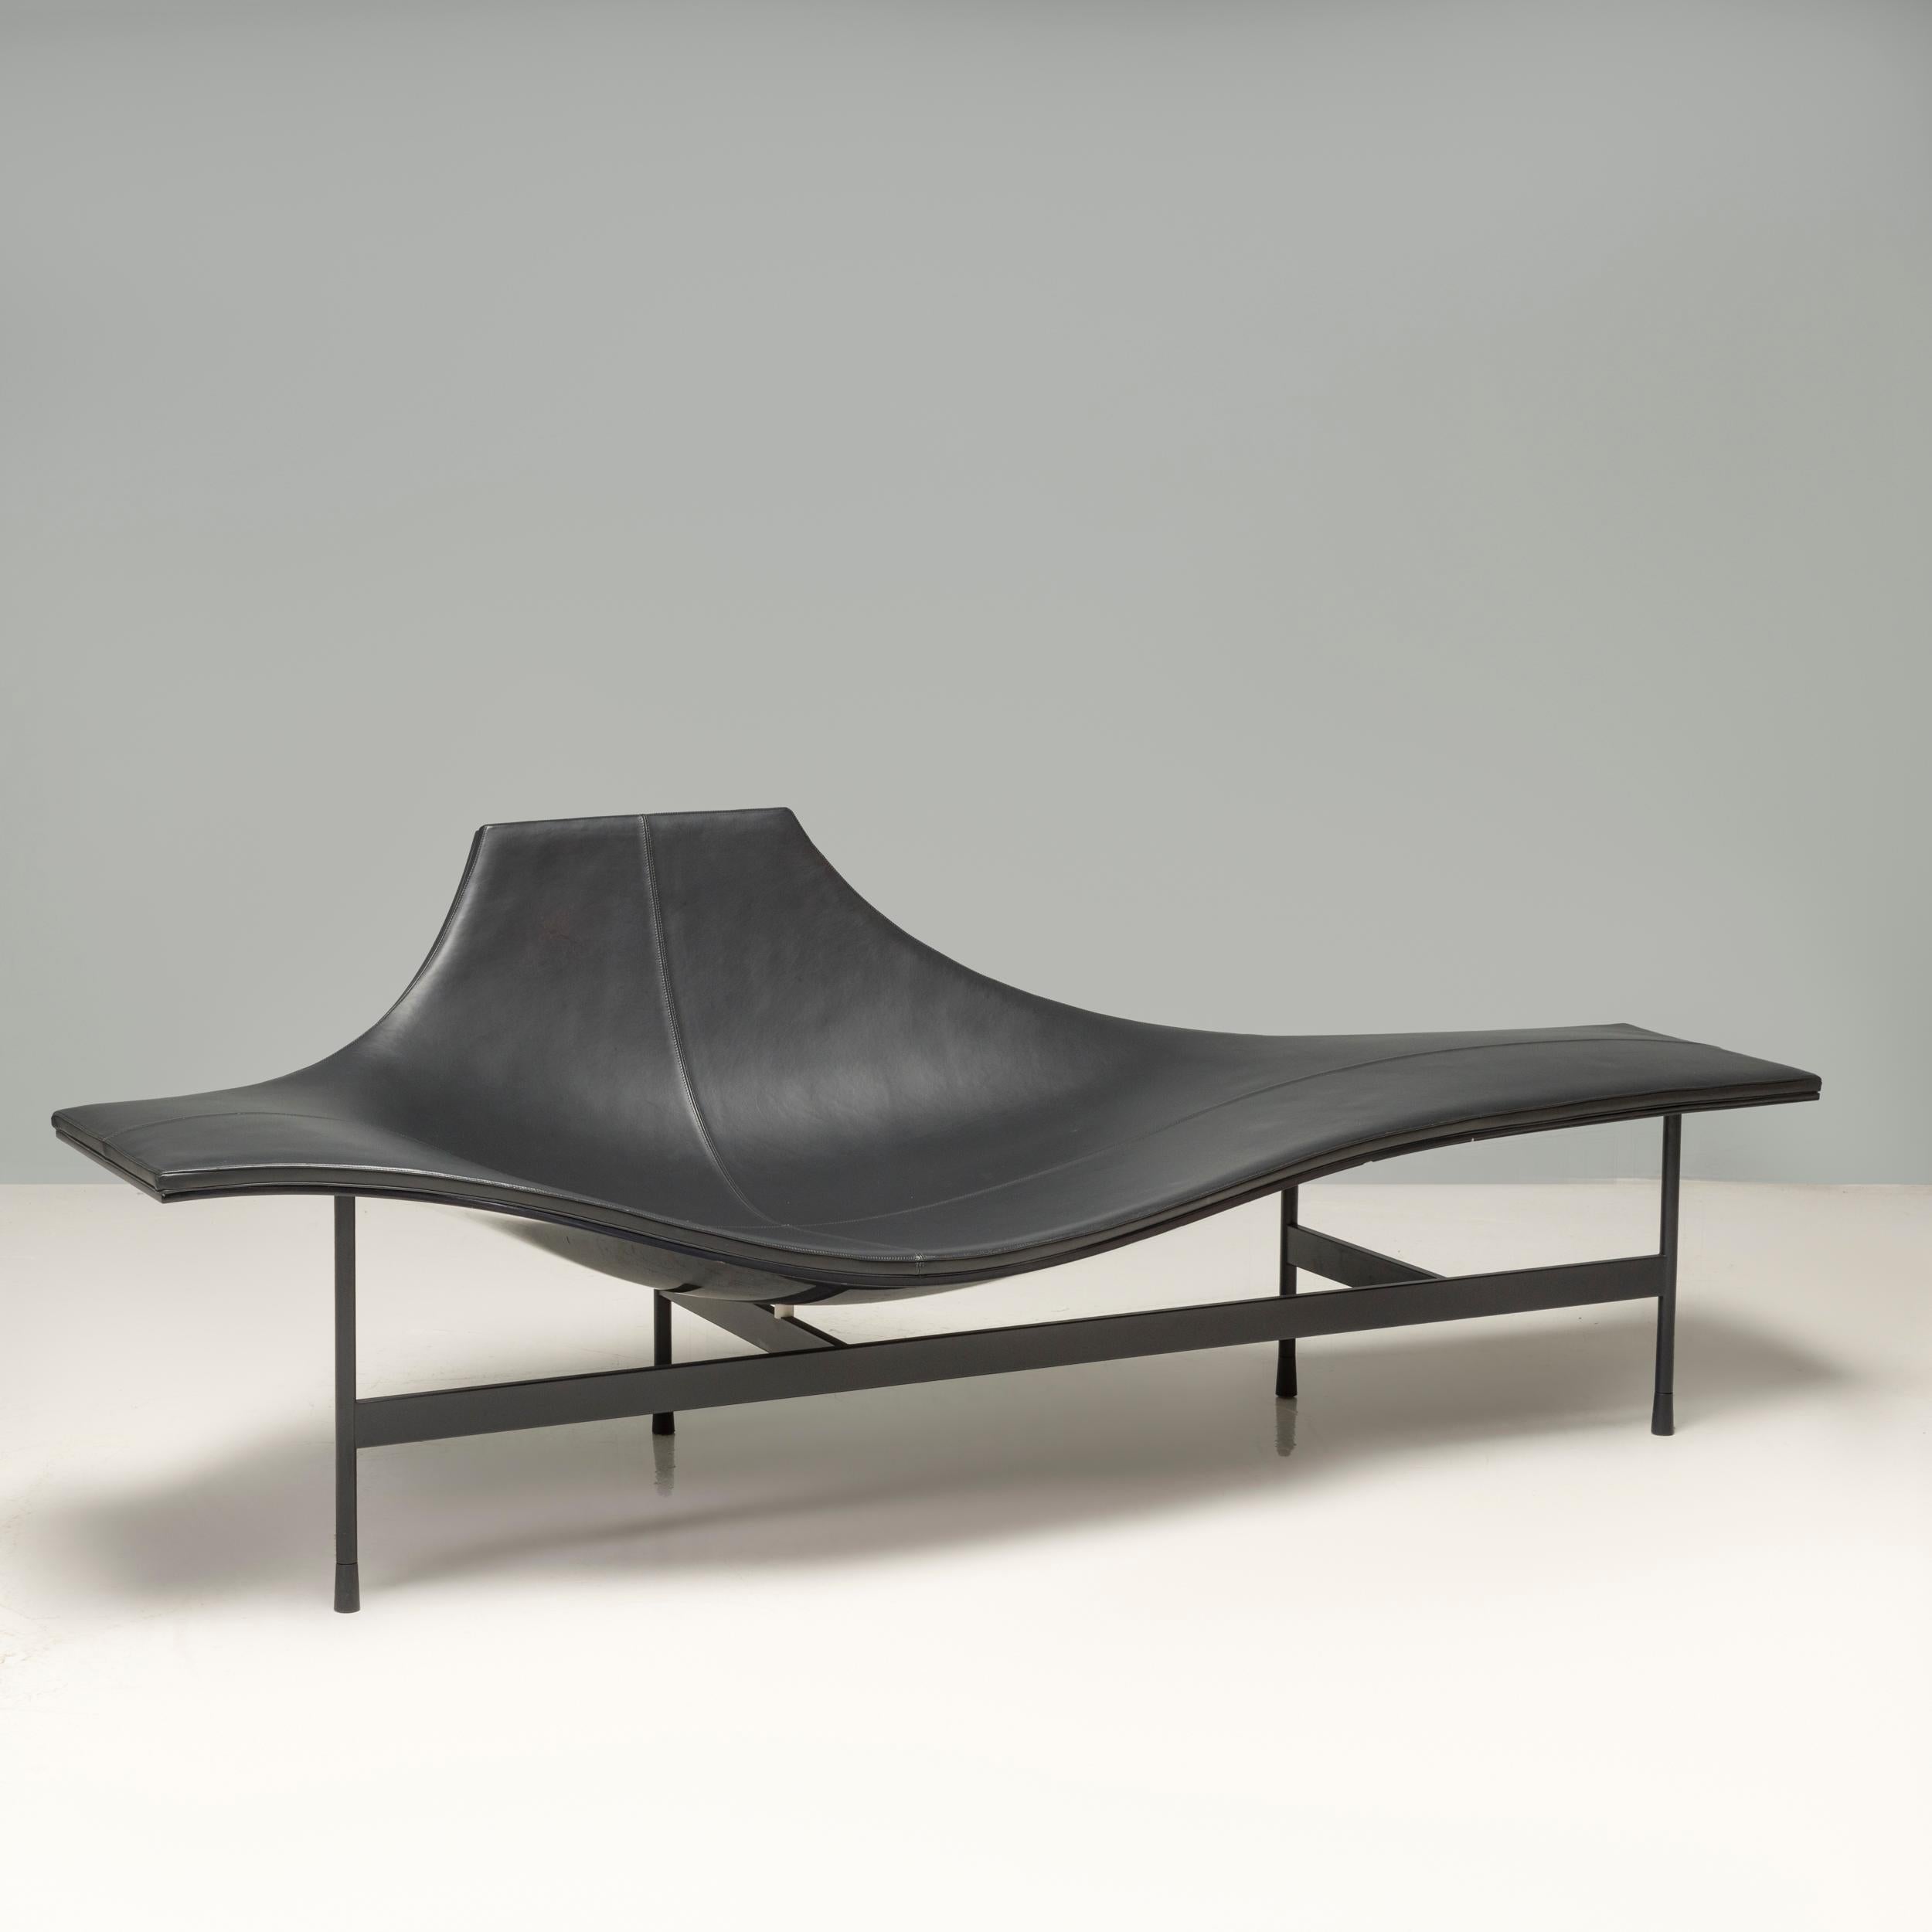 This black chaise lounge was created in 2008 by French architect, inventor and designer Jean-Marie Massaud. The flowing lines of the seat contrasts strikingly with the linear, structural metal base, as do the glossy and matt finishes. With its dual